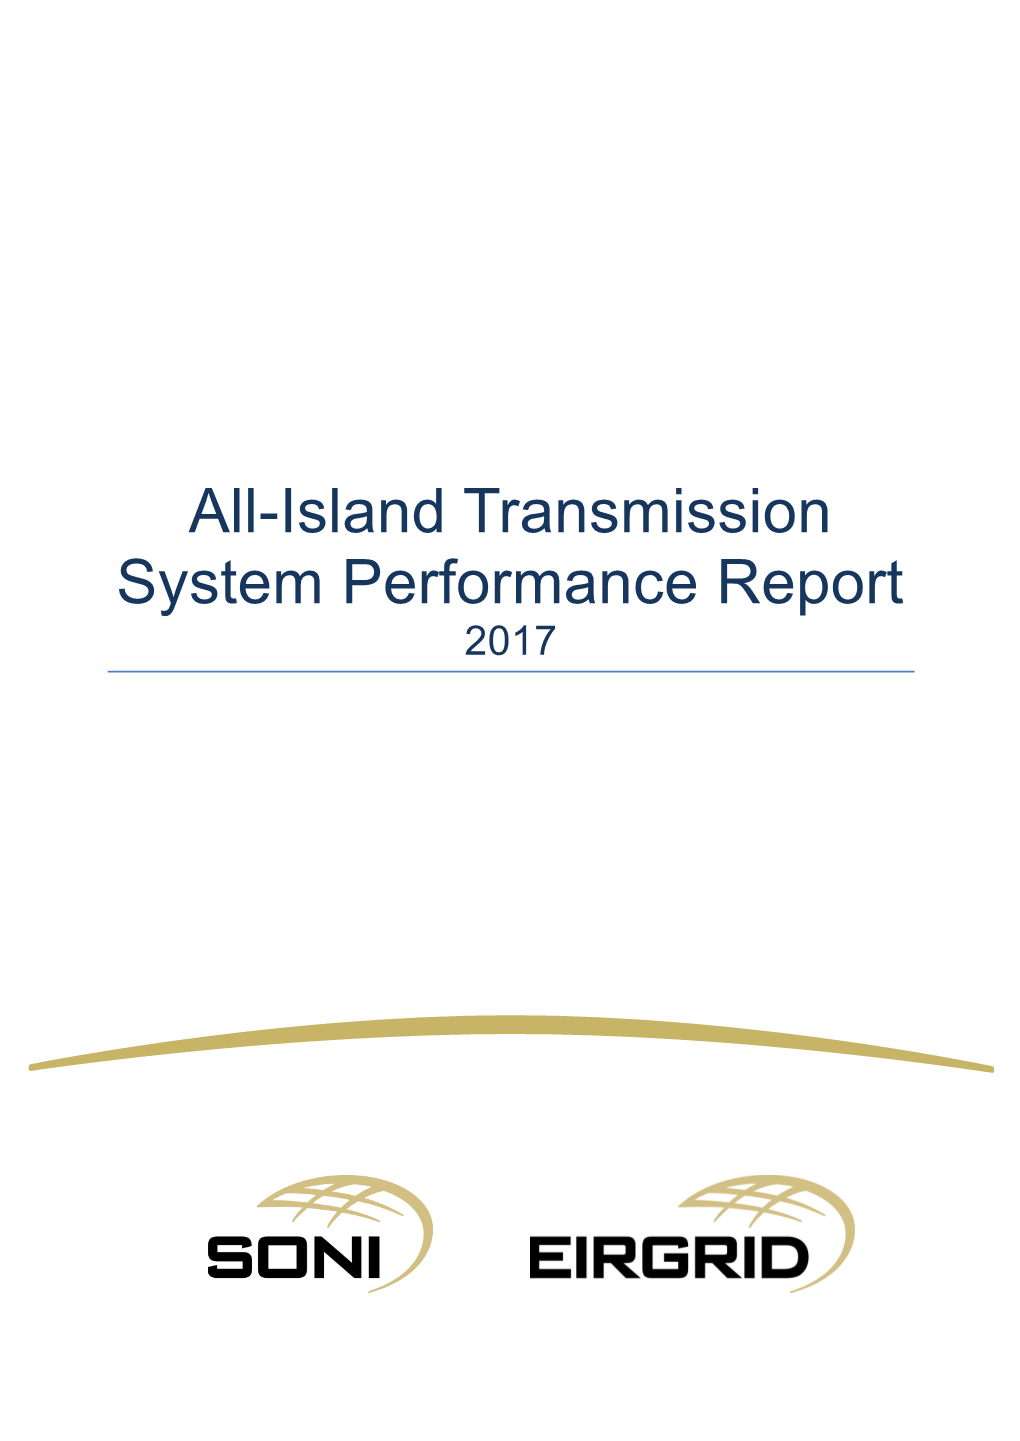 All-Island Transmission System Performance Report 2017